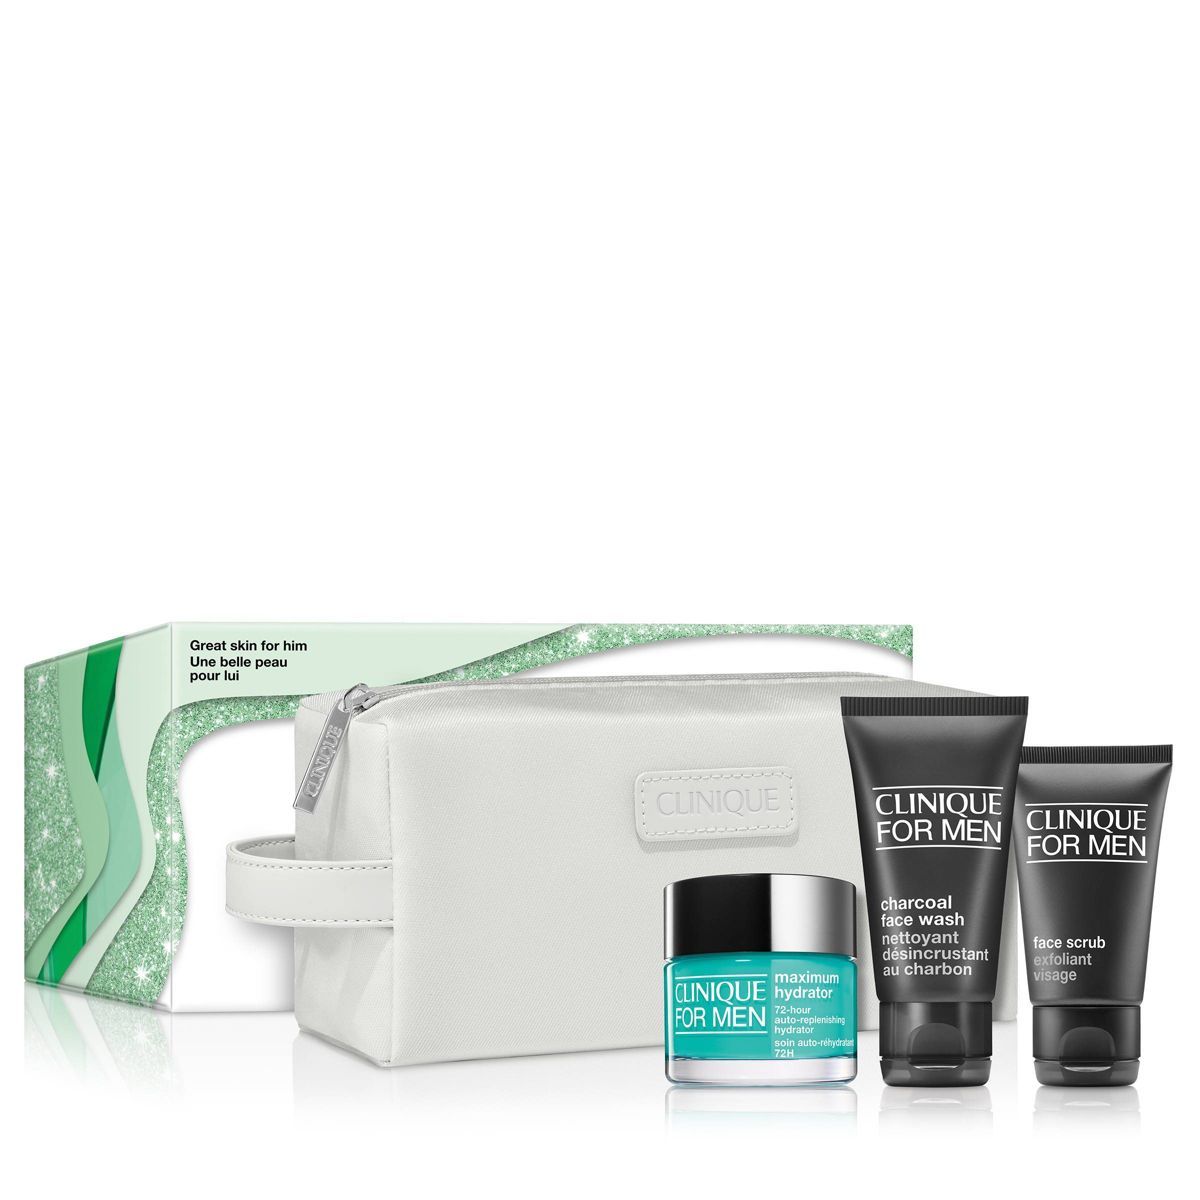 Clinique Great Skin For Him Skincare Gift Set - 2pc - Ulta Beauty | Target